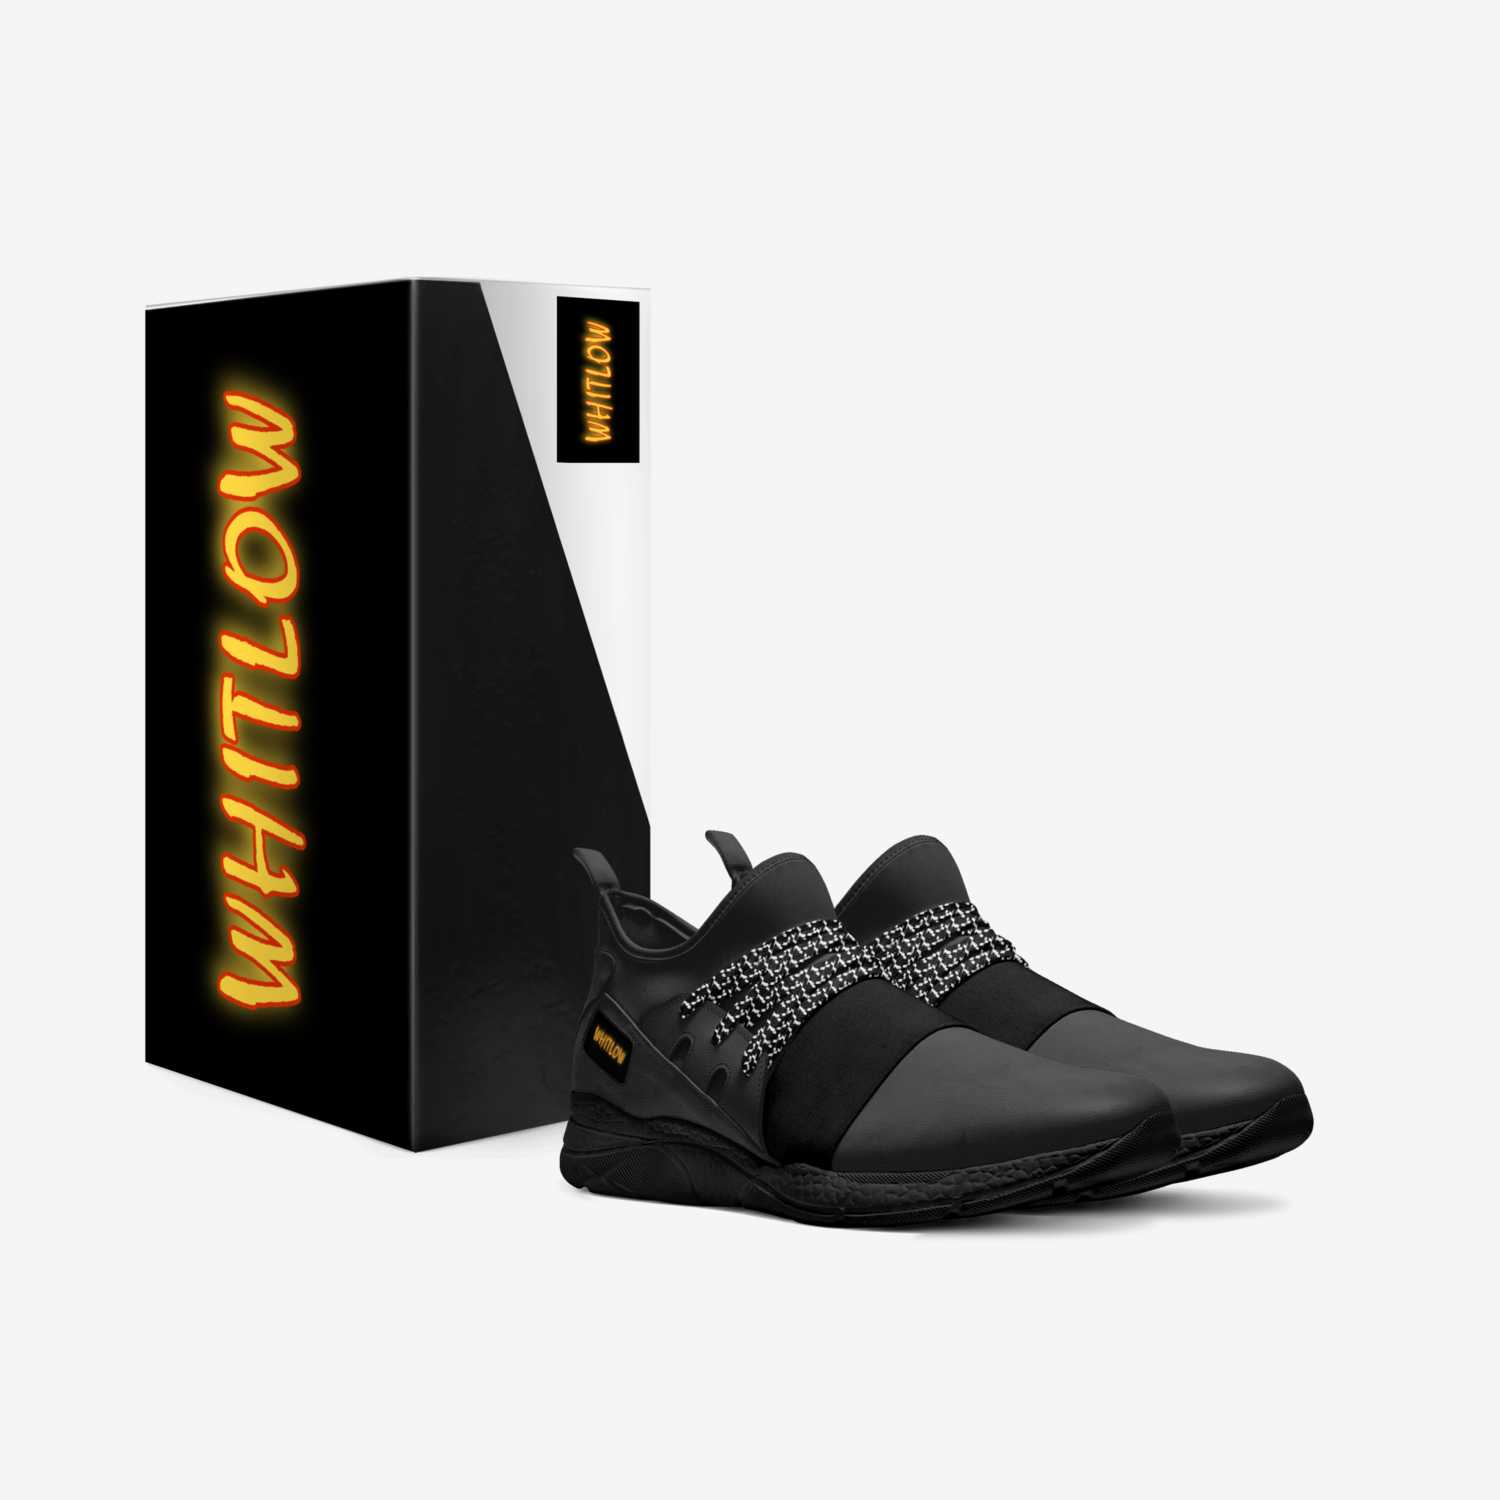 Whitlow-sn 1 custom made in Italy shoes by Shawn Whitlow | Box view